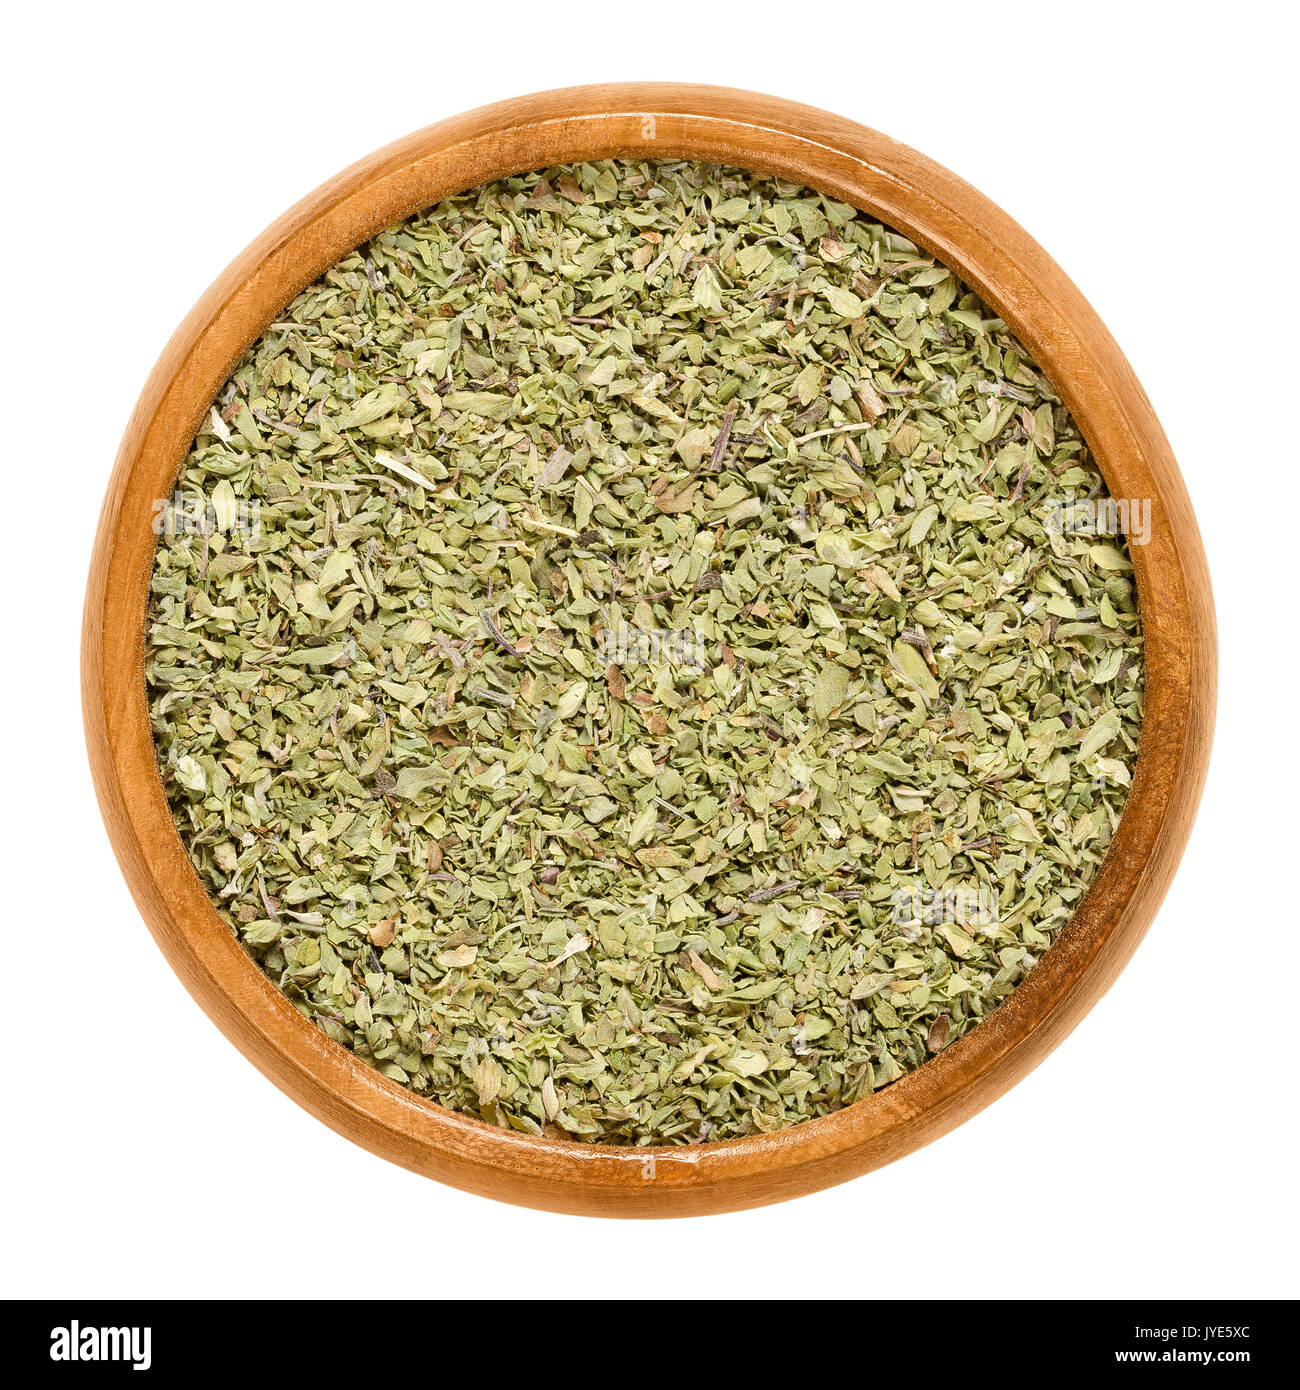 Oregano dried in wooden bowl. Origanum vulgare, sometimes wild marjoram. Herb with aromatic olive green leaves and a slightly bitter taste. Stock Photo